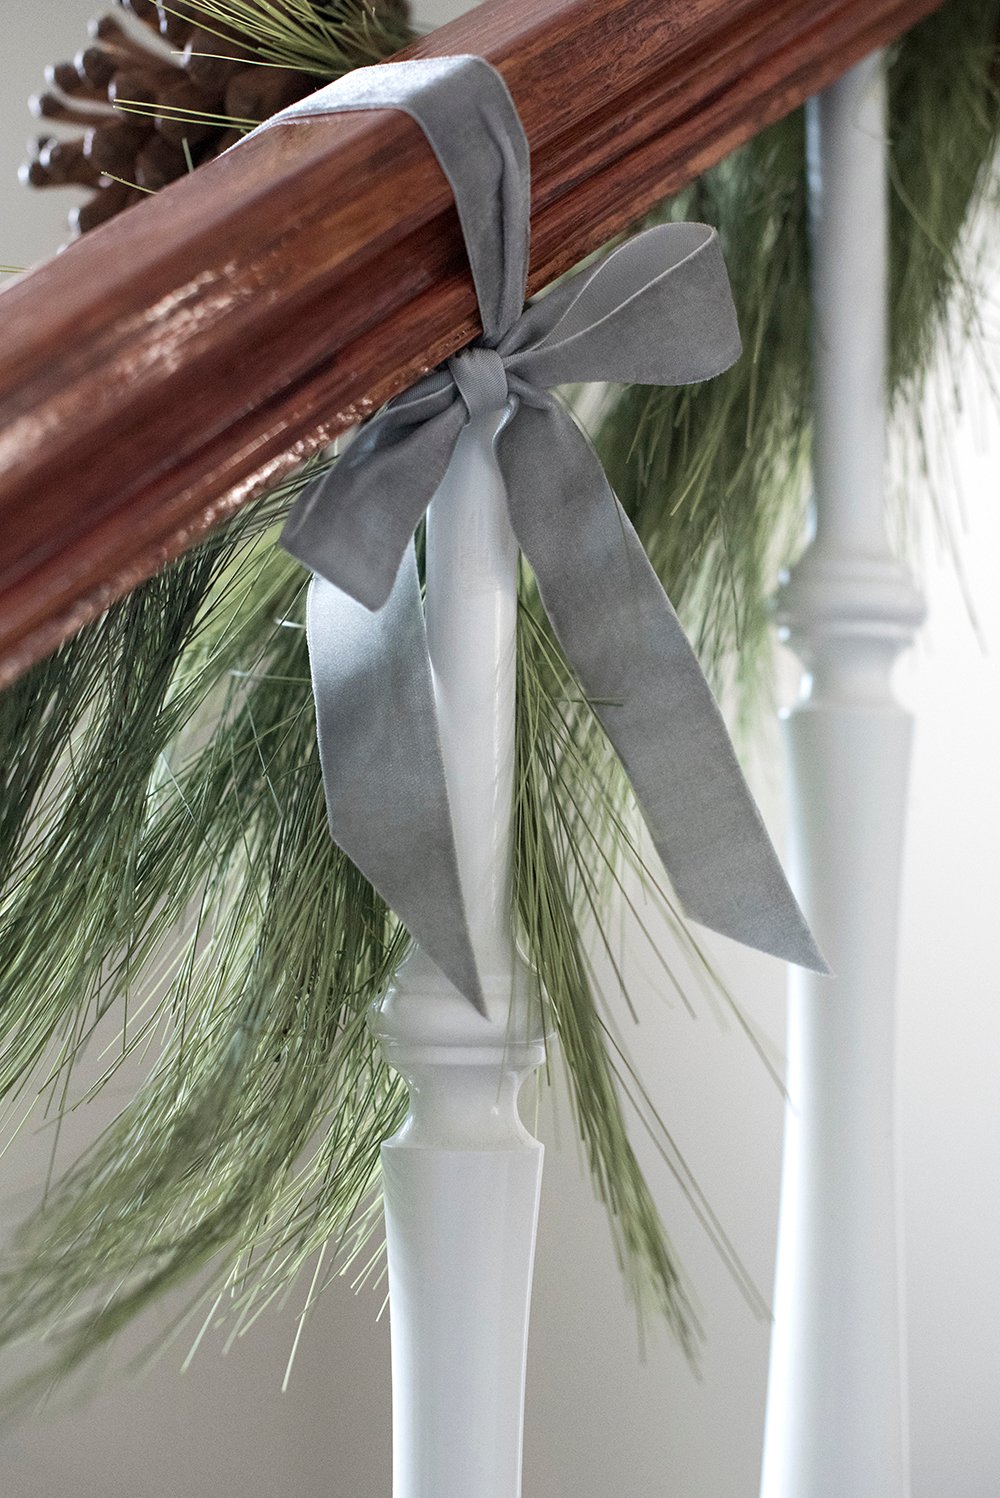 The Best Faux Trees, Garland, & Holiday Wreaths - roomfortuesday.com